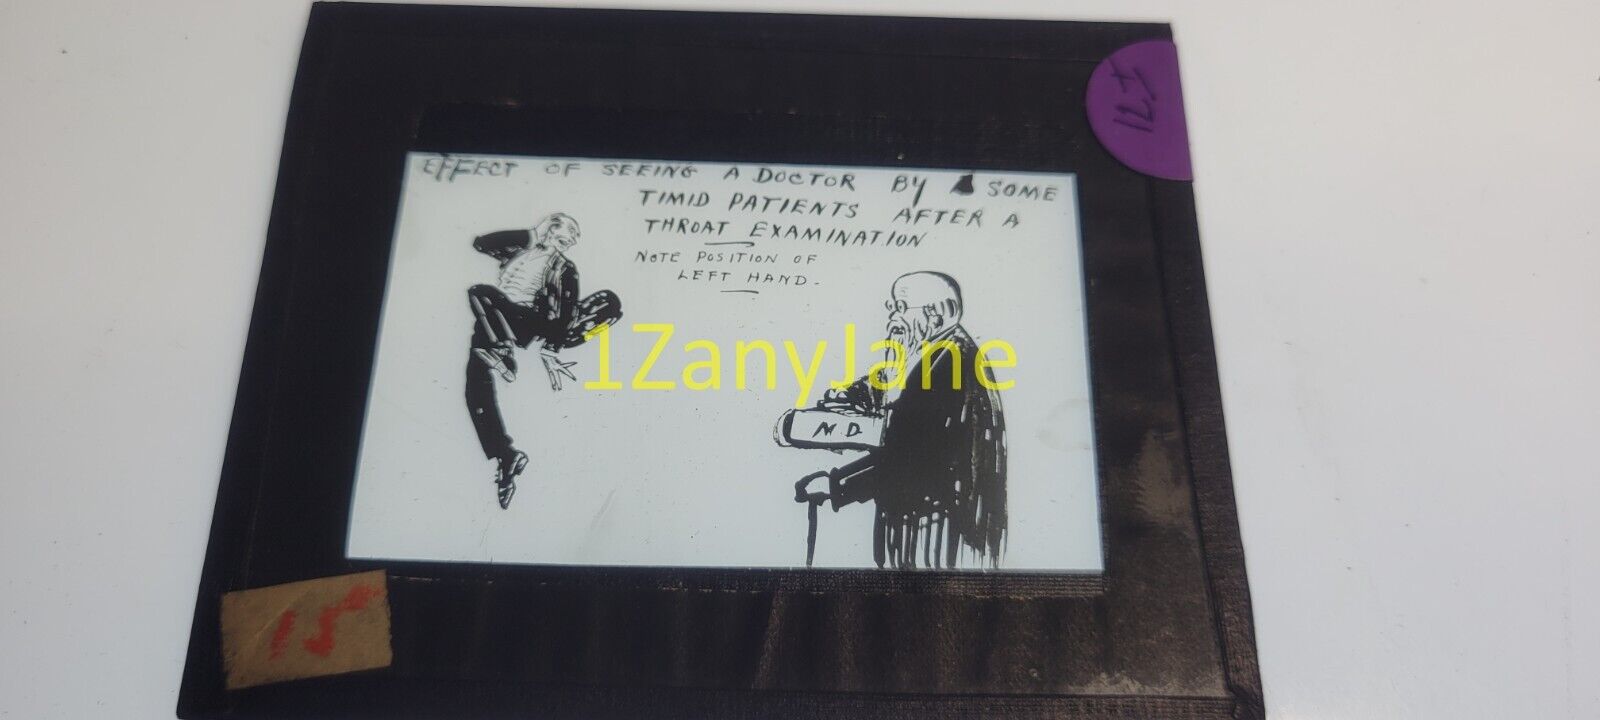 I71 HISTORIC Glass Magic Lantern Slide EFFECT OF SEEING A DOCTOR BY SOME TIMID